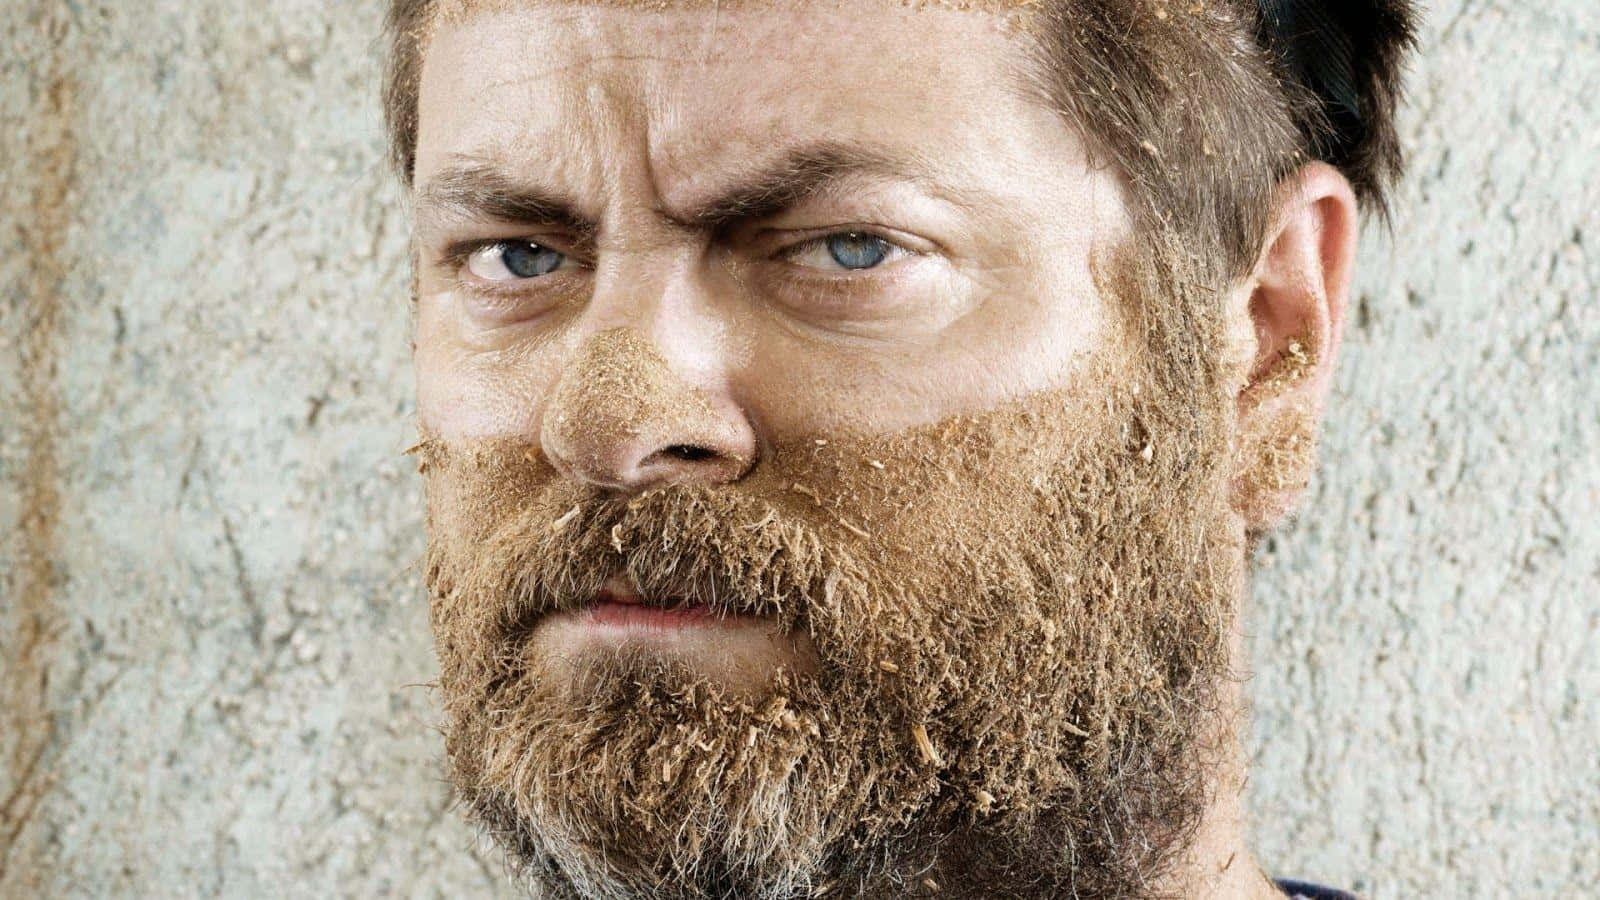 Nick Offerman, American Actor, Producer And Comedian